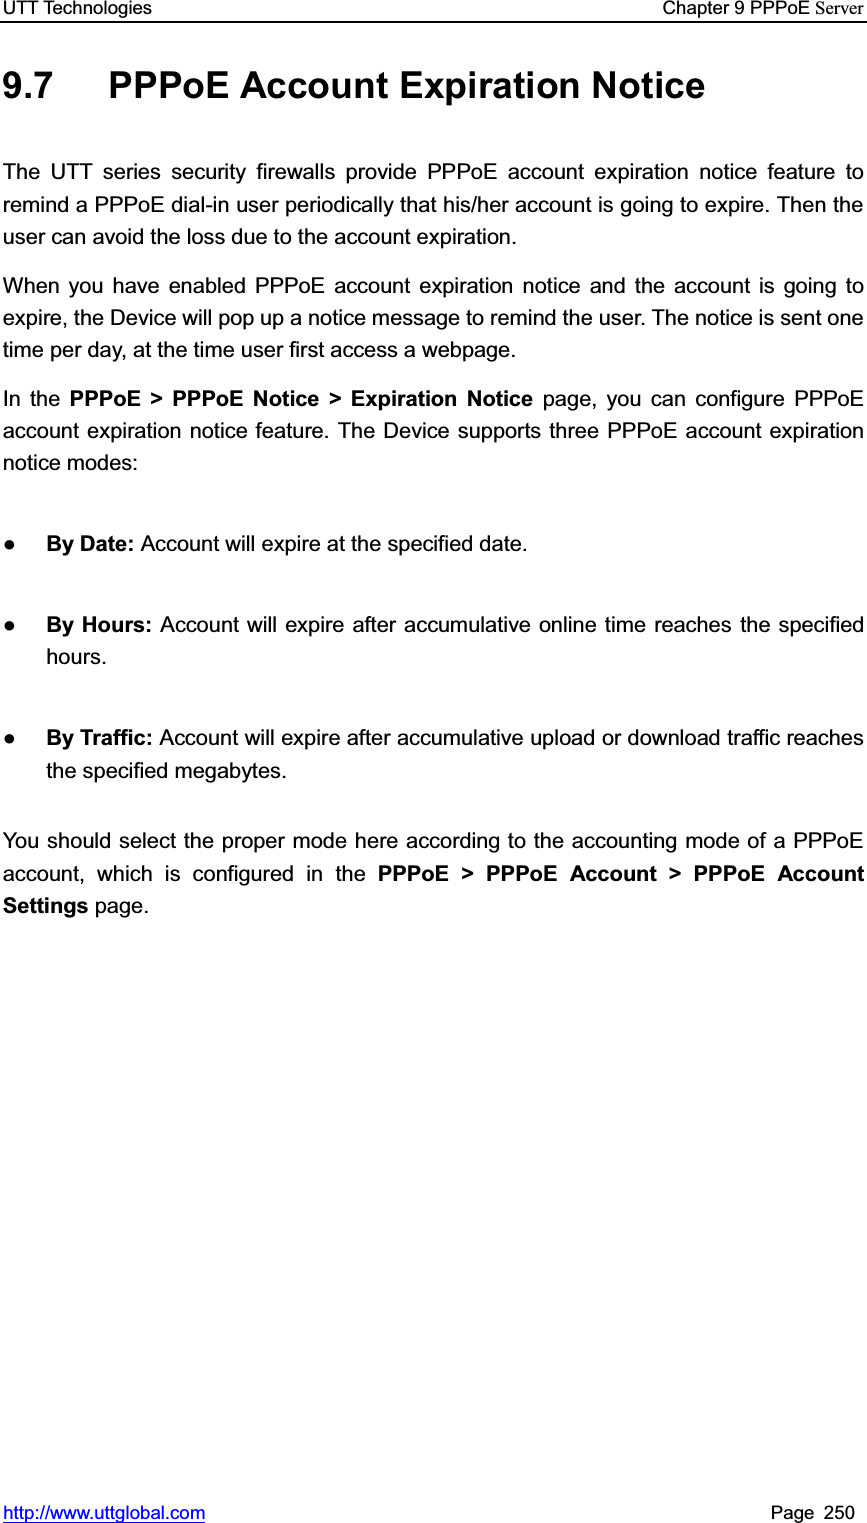 UTT Technologies    Chapter 9 PPPoE Serverhttp://www.uttglobal.com Page 250 9.7 PPPoE Account Expiration Notice The UTT series security firewalls provide PPPoE account expiration notice feature to remind a PPPoE dial-in user periodically that his/her account is going to expire. Then the user can avoid the loss due to the account expiration. When you have enabled PPPoE account expiration notice and the account is going to expire, the Device will pop up a notice message to remind the user. The notice is sent one time per day, at the time user first access a webpage.   In the PPPoE &gt; PPPoE Notice &gt; Expiration Notice page, you can configure PPPoE account expiration notice feature. The Device supports three PPPoE account expiration notice modes: ƔBy Date: Account will expire at the specified date.   ƔBy Hours: Account will expire after accumulative online time reaches the specified hours. ƔBy Traffic: Account will expire after accumulative upload or download traffic reaches the specified megabytes. You should select the proper mode here according to the accounting mode of a PPPoE account, which is configured in the PPPoE &gt; PPPoE Account &gt; PPPoE AccountSettings page. 